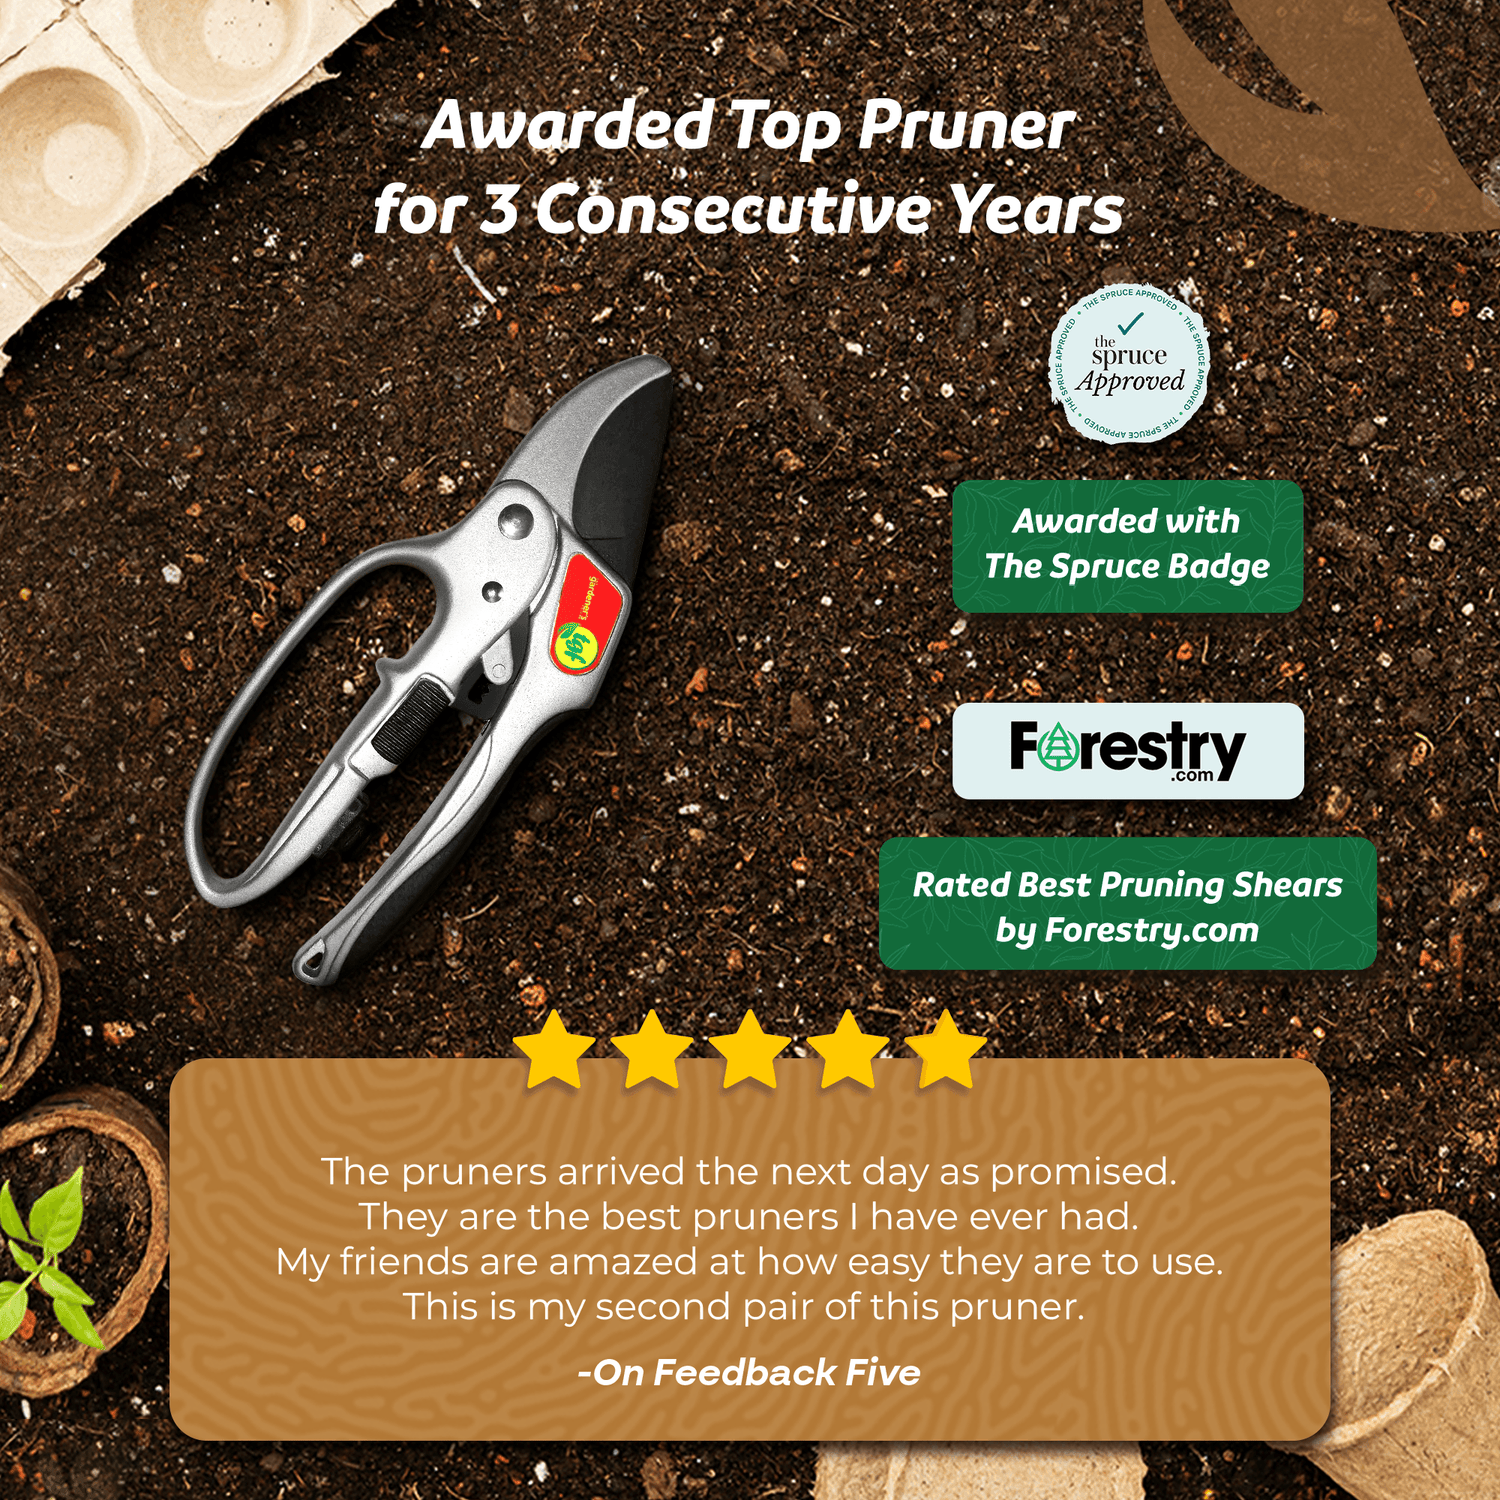 Top pruner awarded for 3 consecutive years, featuring the Spruce Badge, rated best by forestry.com.